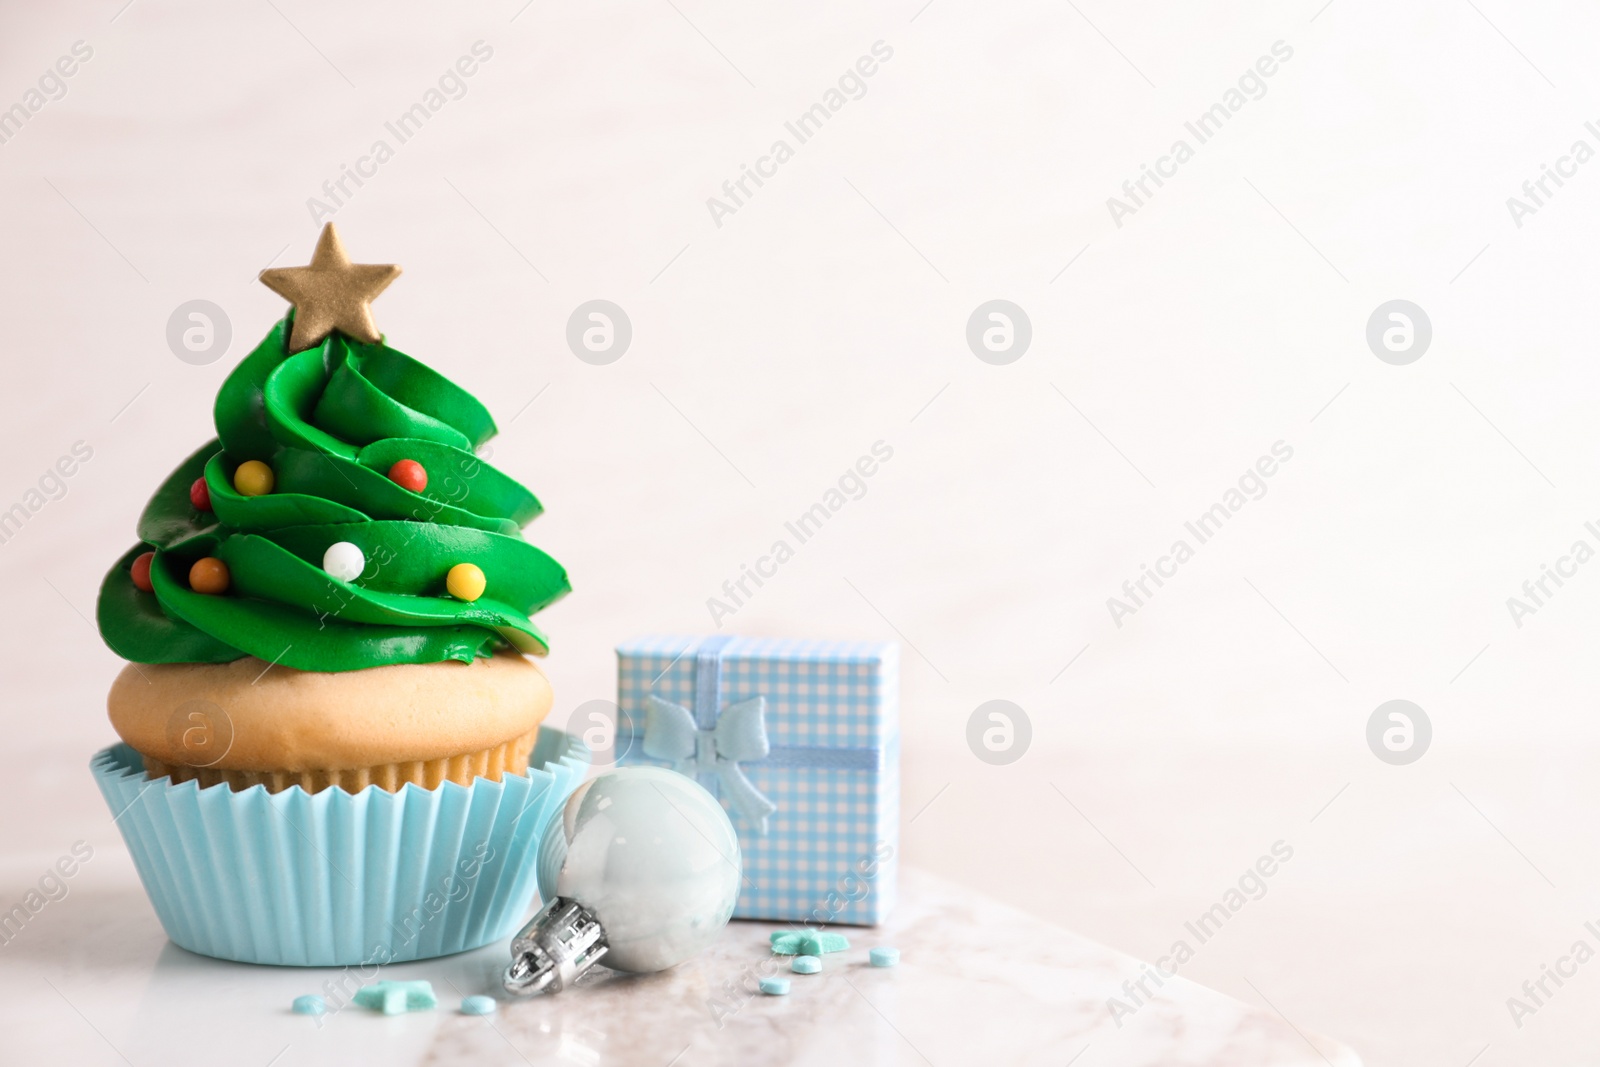 Photo of Christmas tree shaped cupcake and decor on table. Space for text